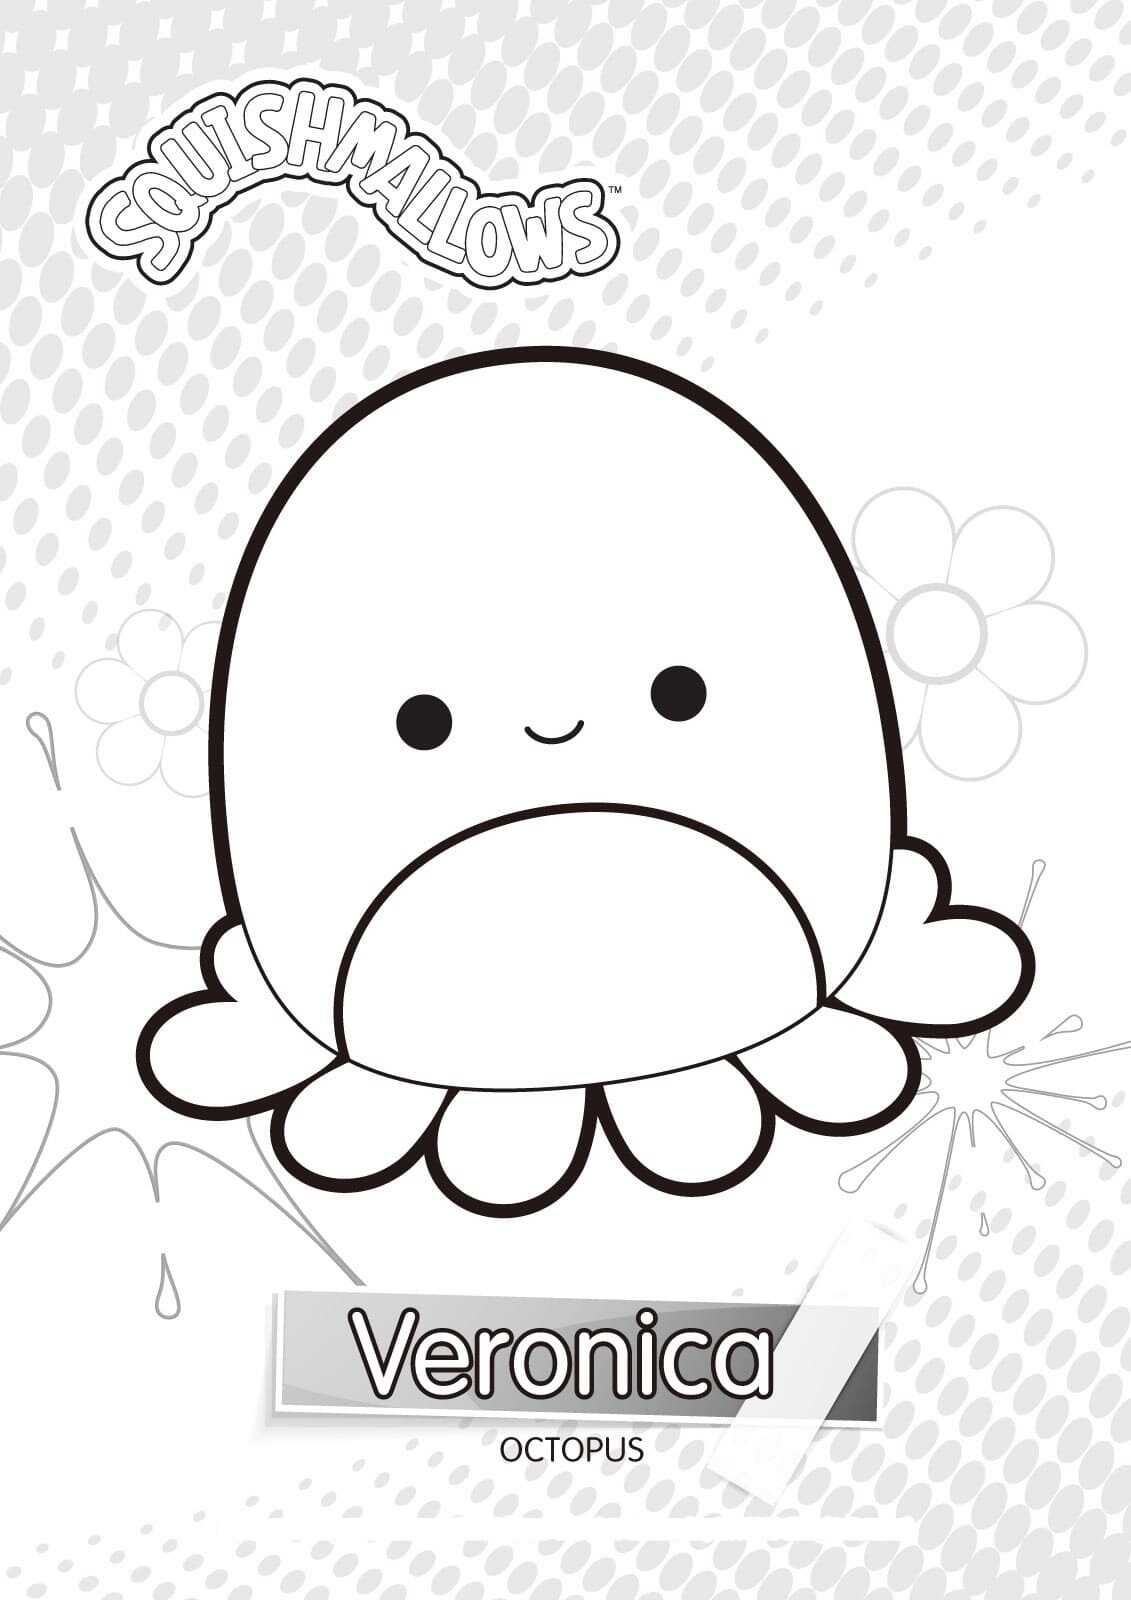 Veronica tomato red octopus with a white belly from Squishmallow Coloring  Pages - Squishmallow Coloring Pages - Coloring Pages For Kids And Adults